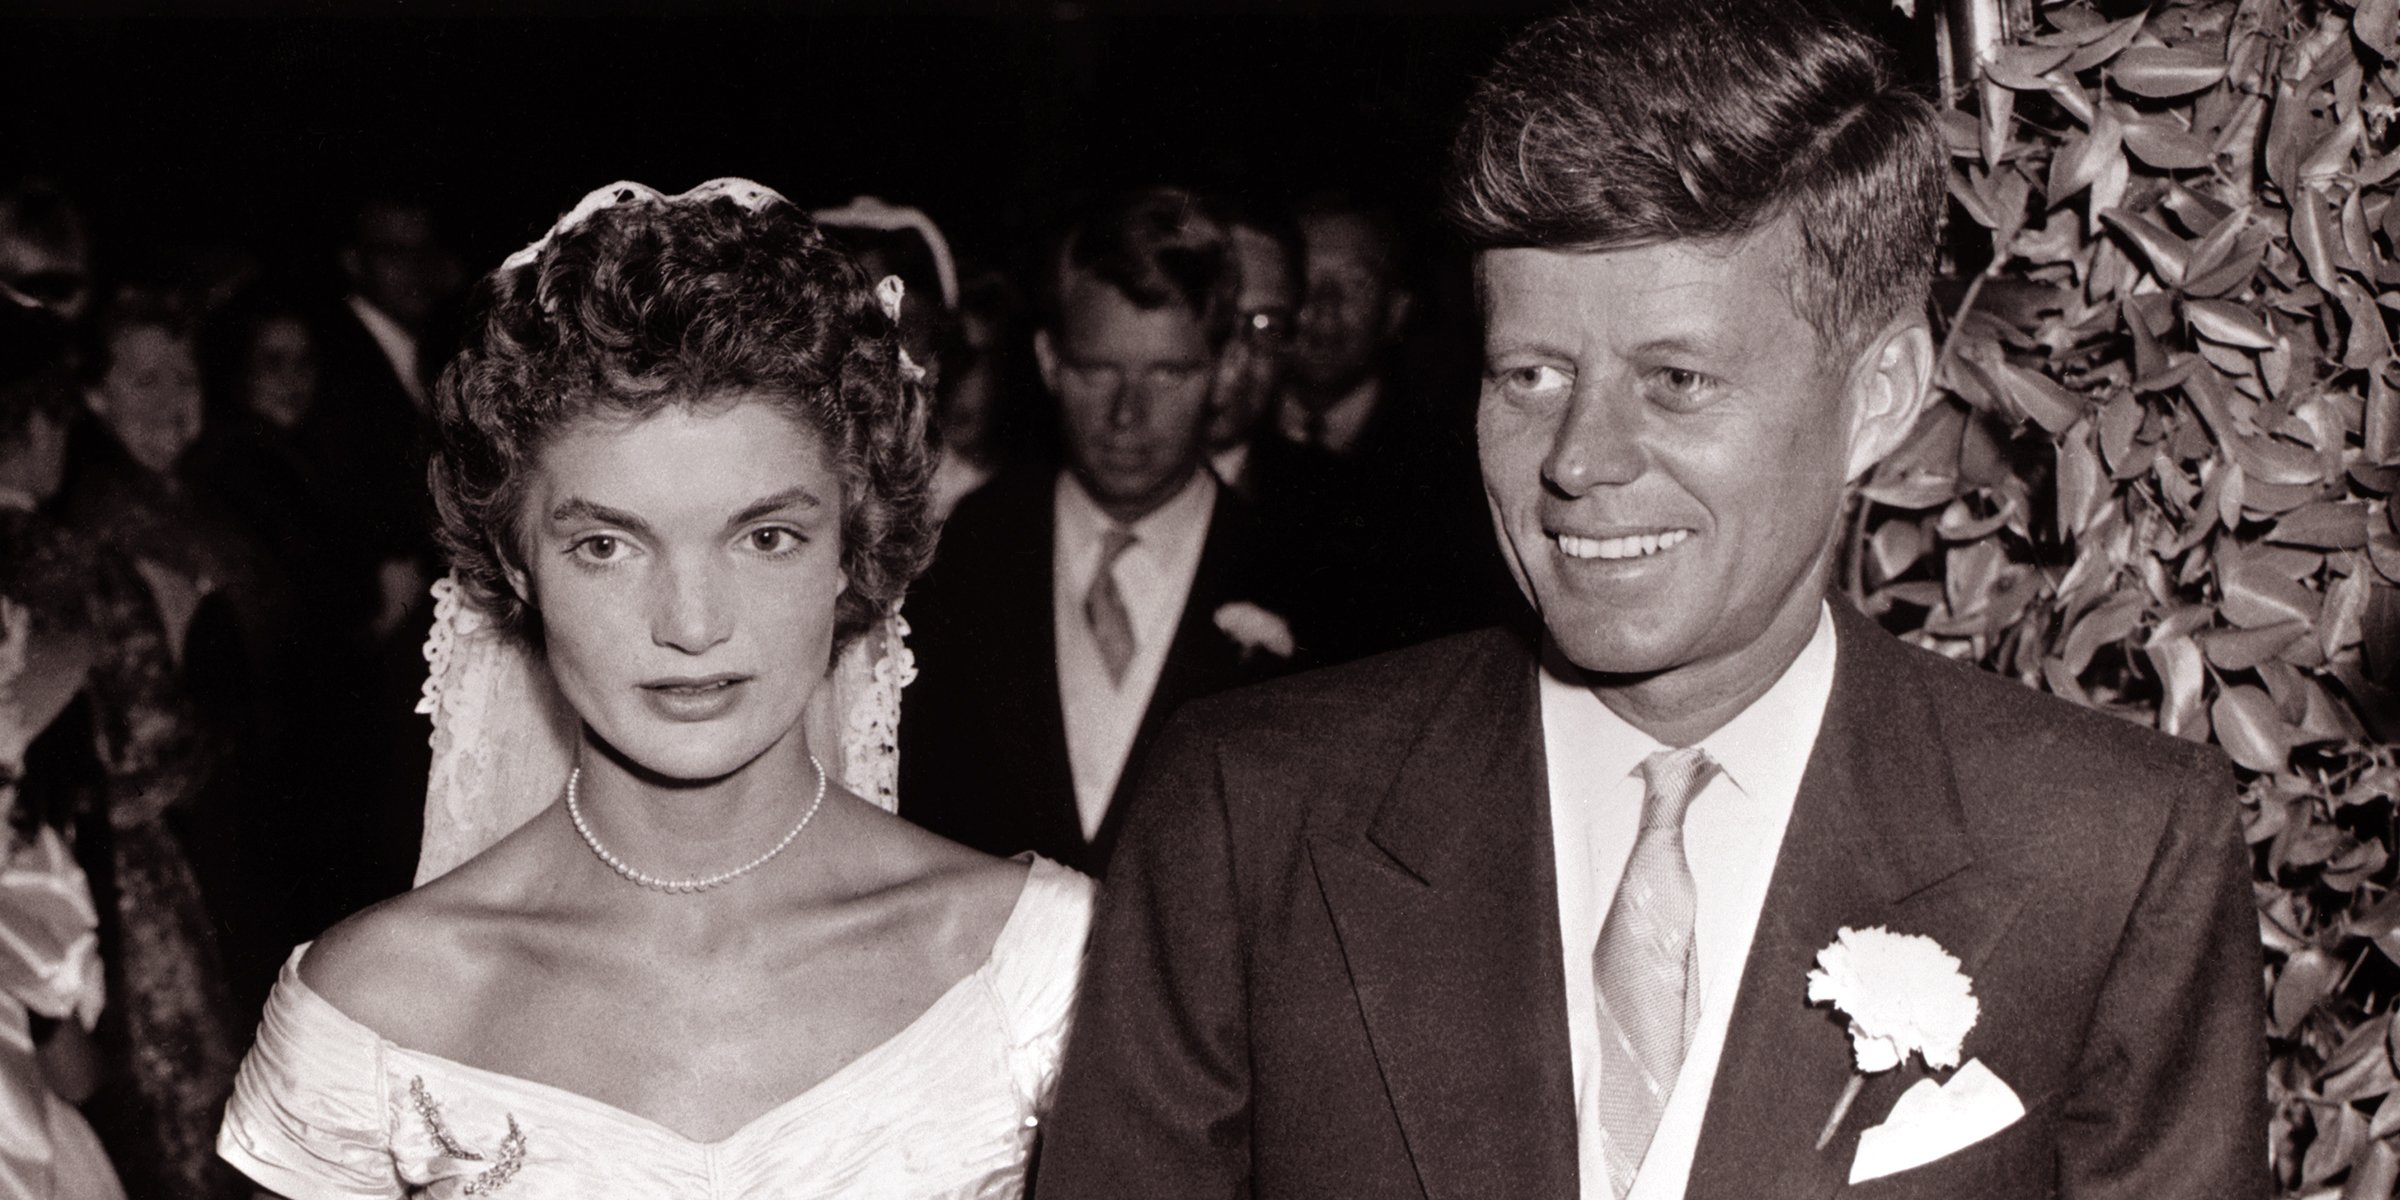 Jackie Kennedy and John F. Kennedy | Source: Getty Images